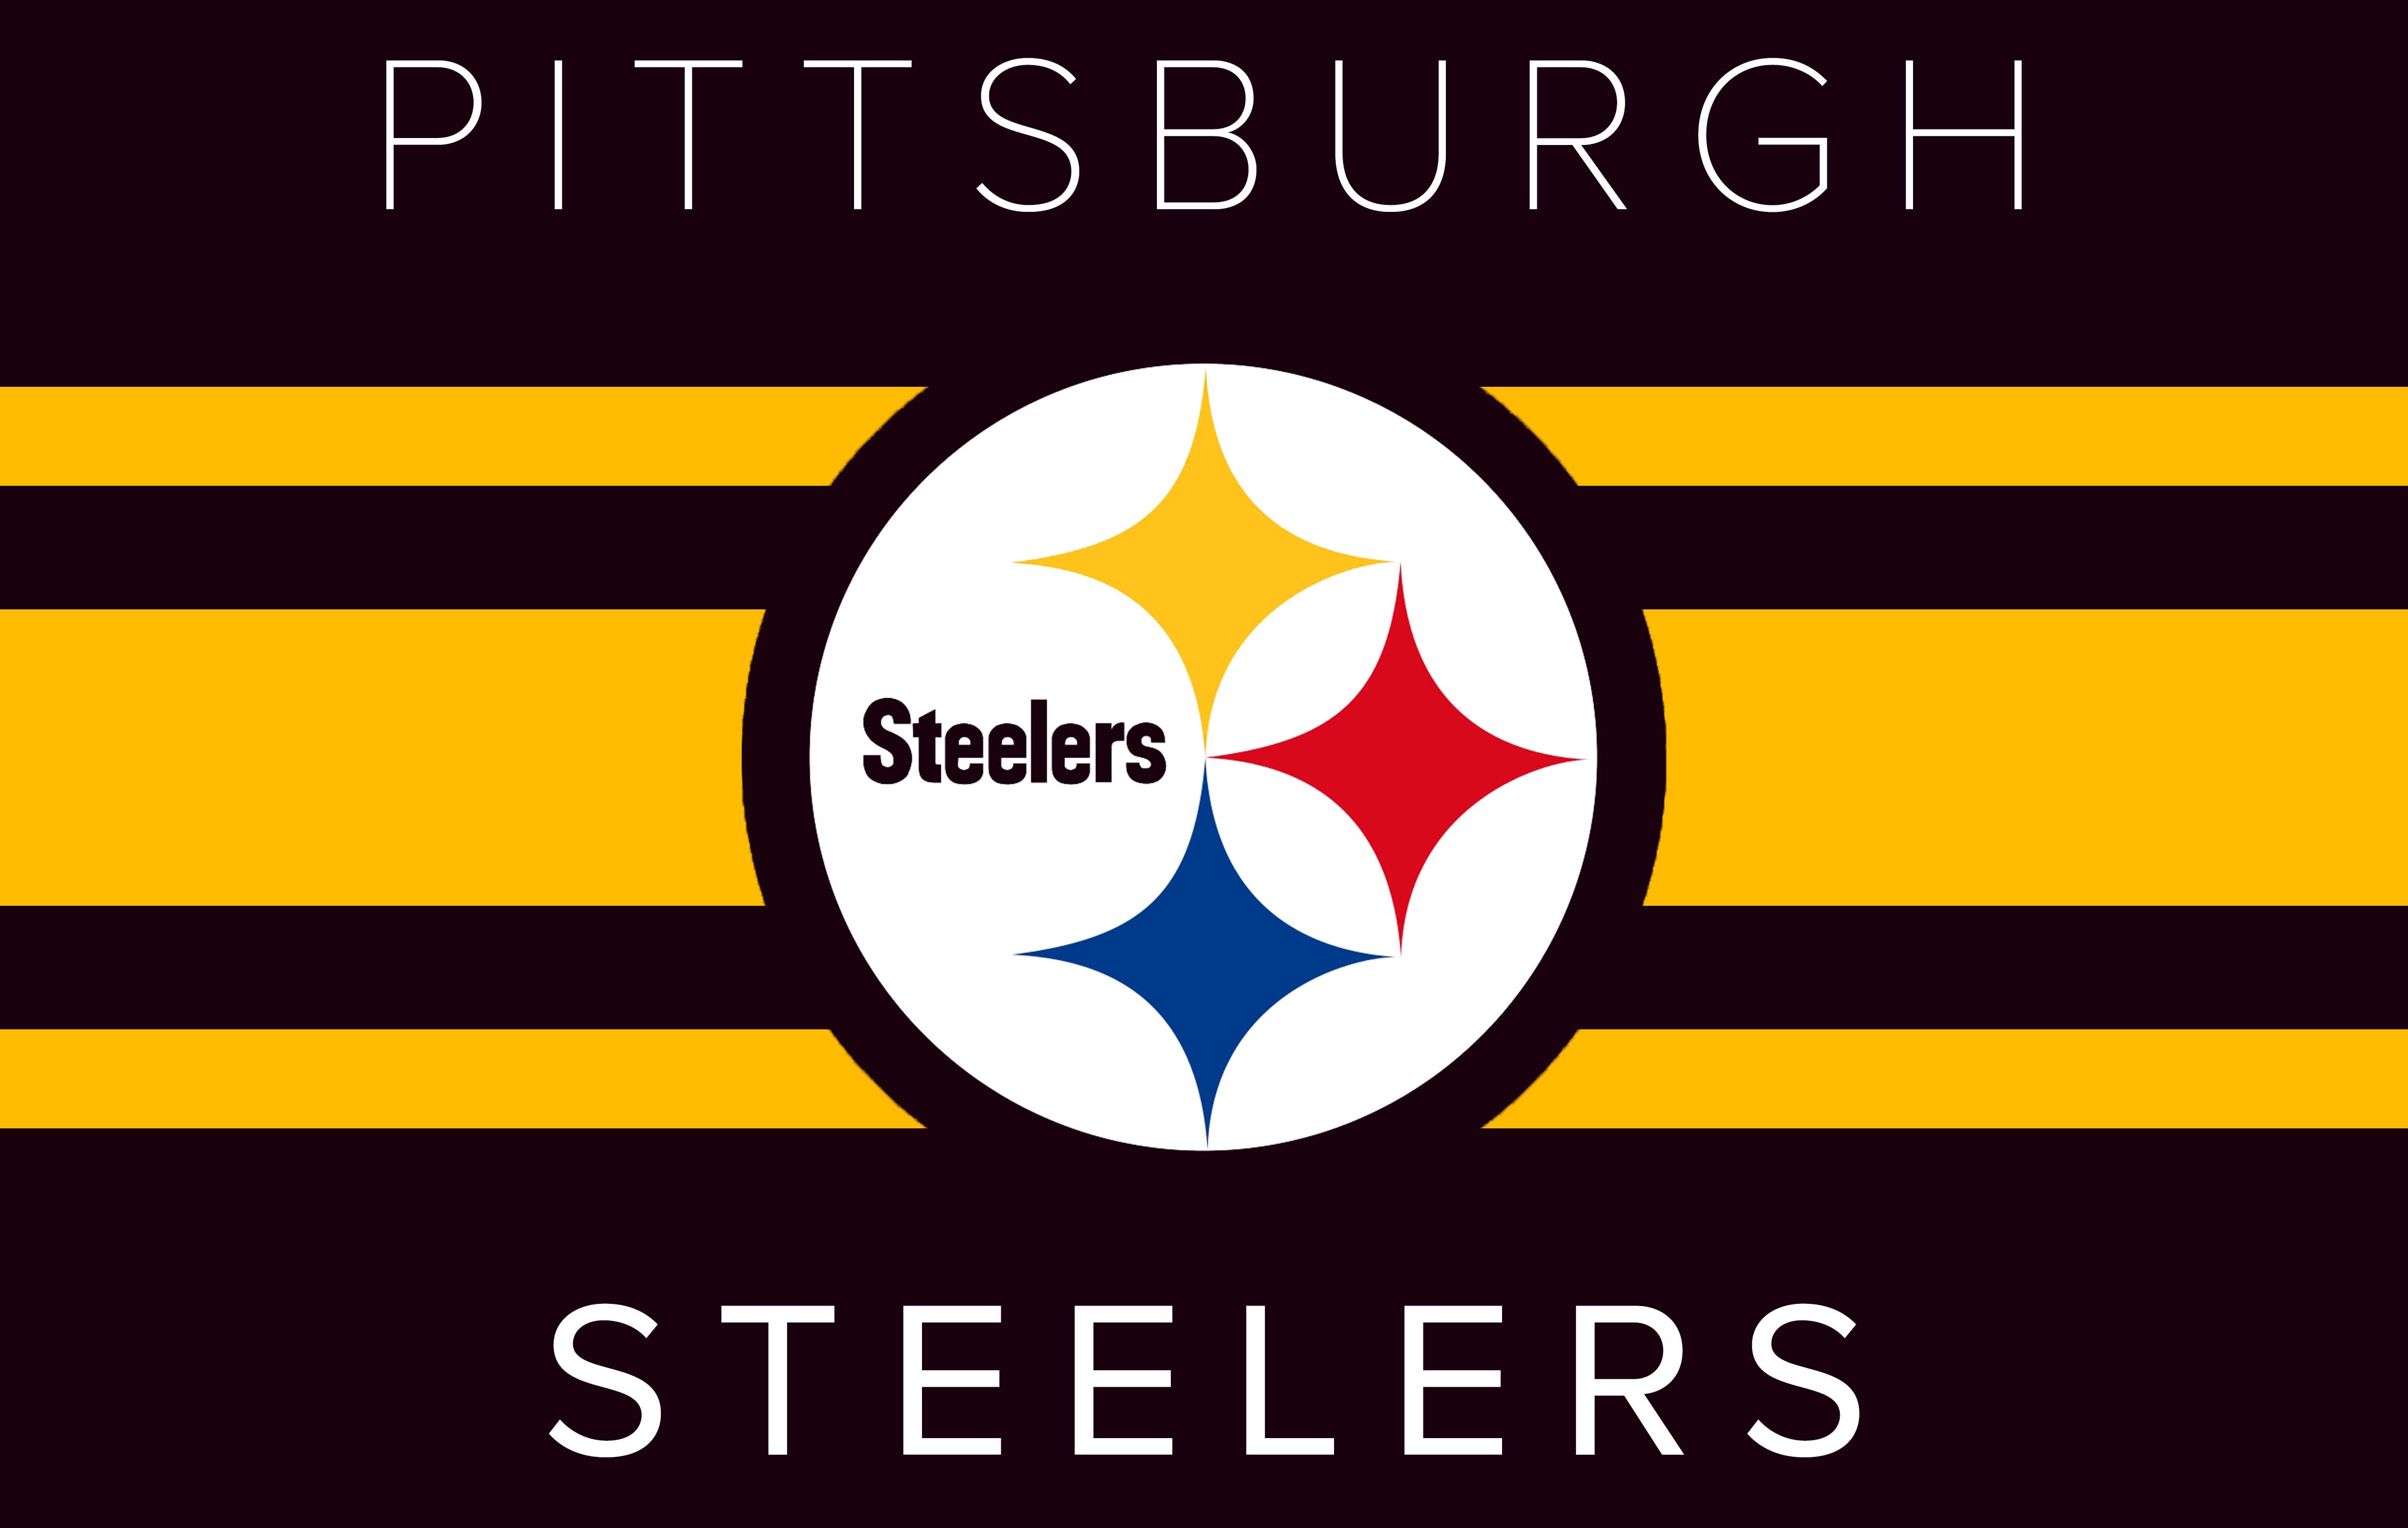 Best Adorable Image of Pittsburgh Steelers